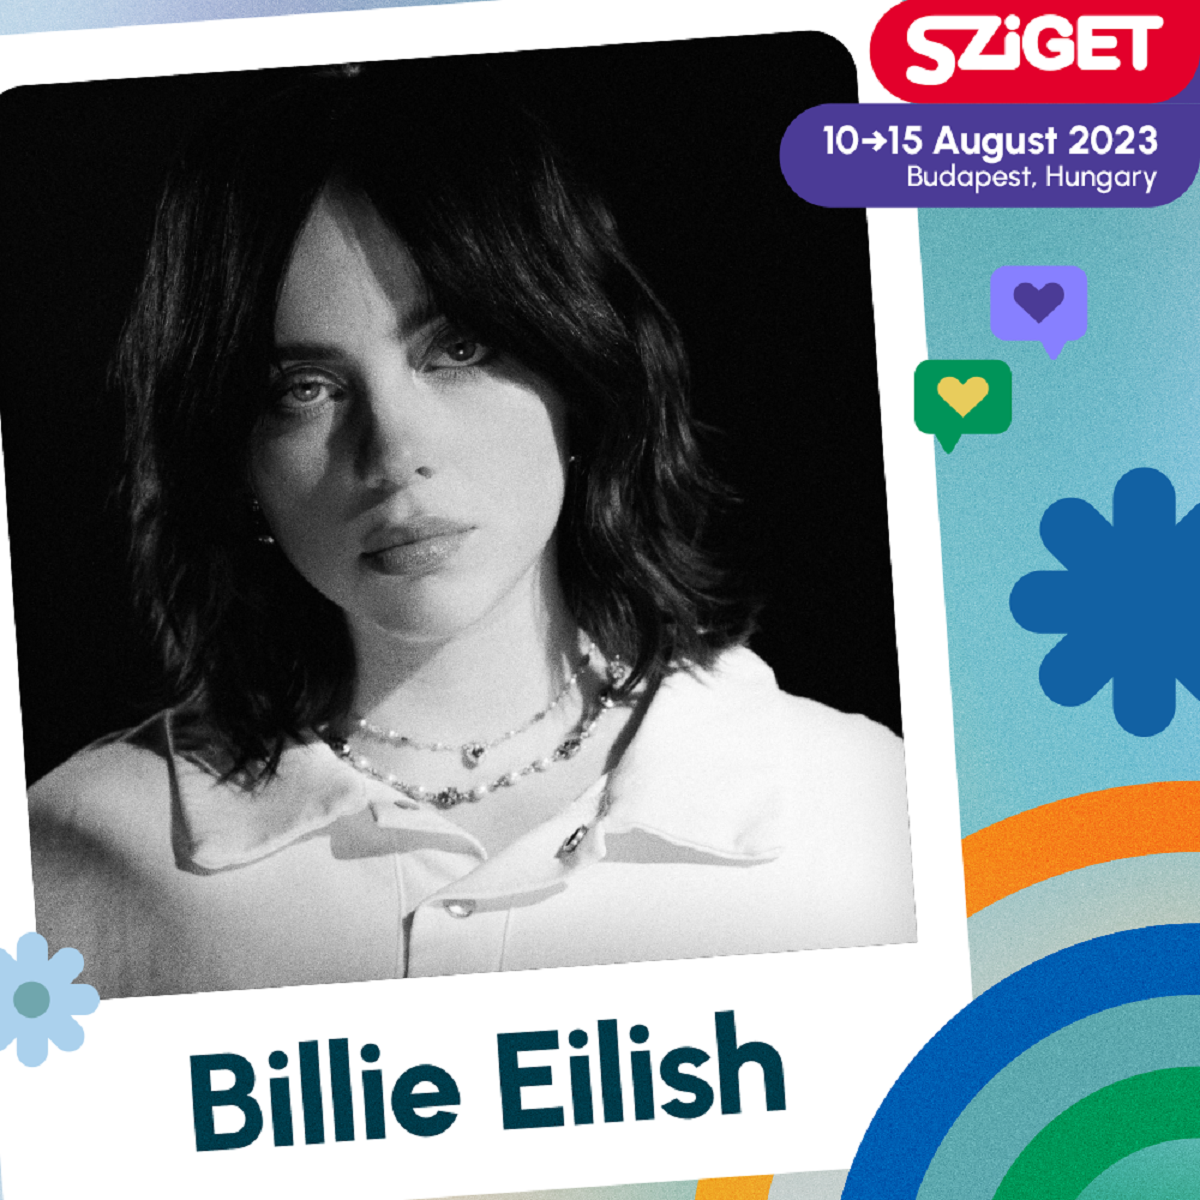 Tickets Go On Sale For Sziget Festival, With Headliners Billie Eilish and  Florence + The Machine – Brno Daily